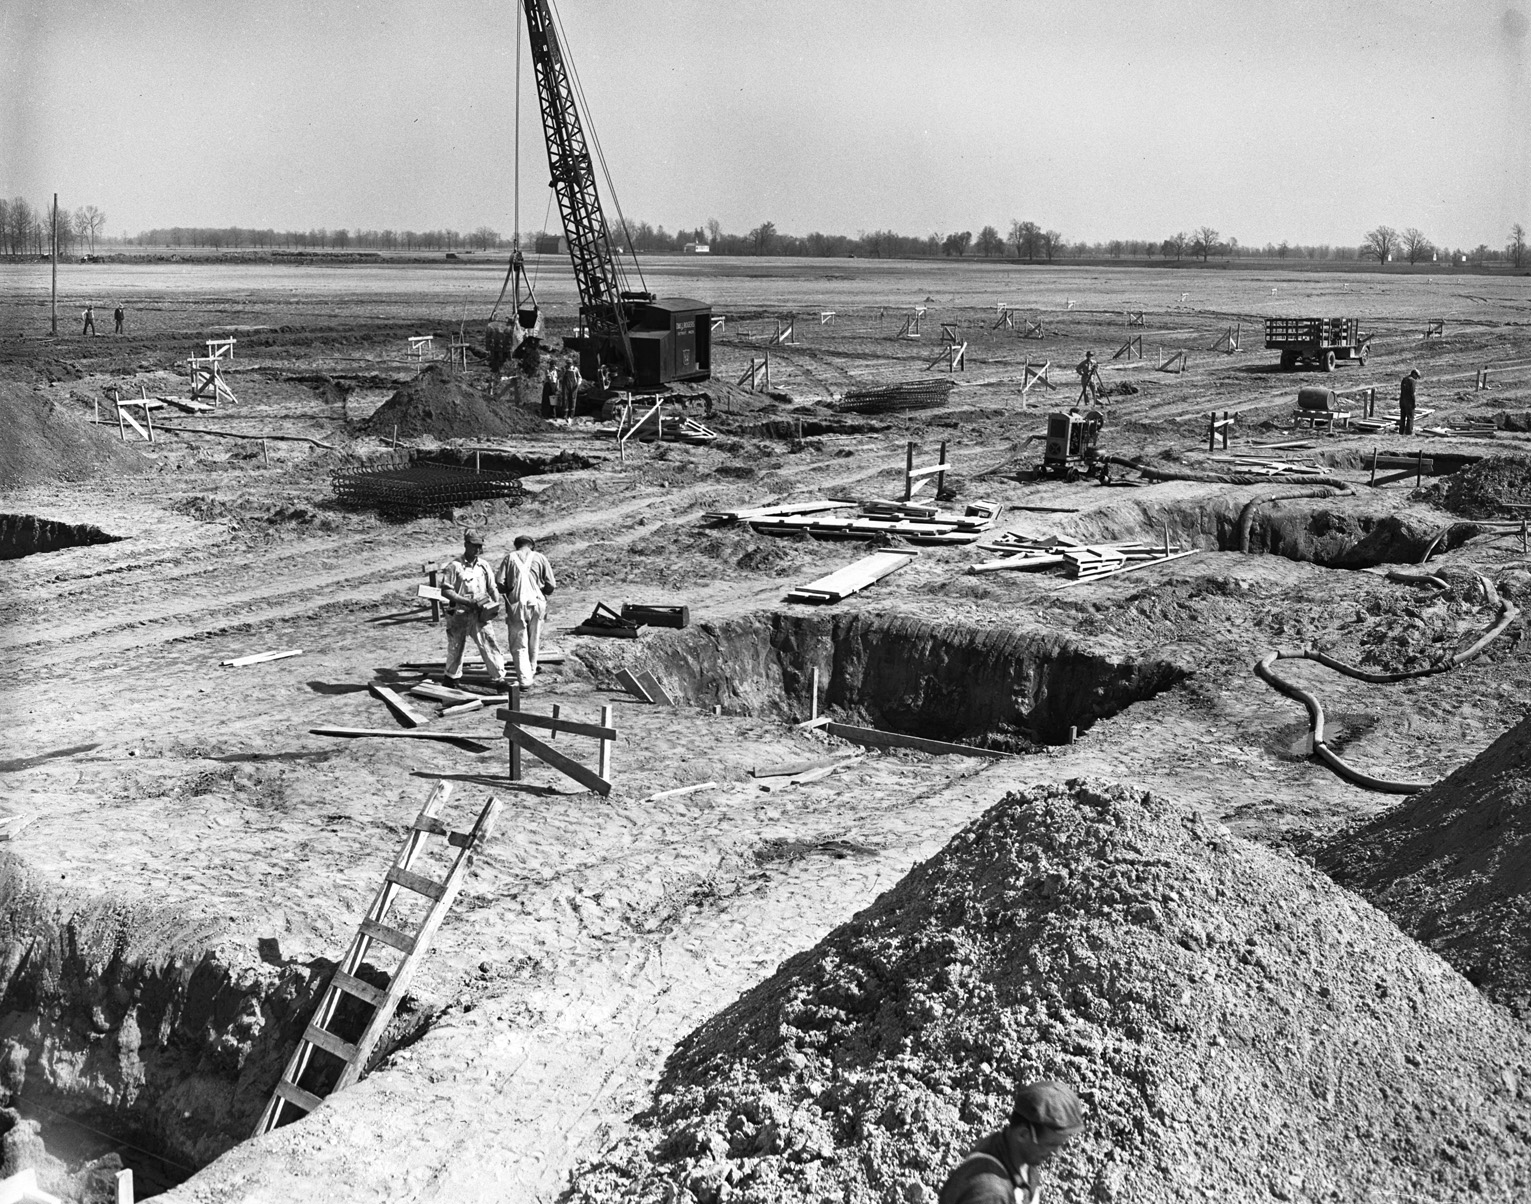 Willow Run plant under construction, 1940. With nearly 5 million square feet, the factory was touted as the largest single-story building in the world at the time.